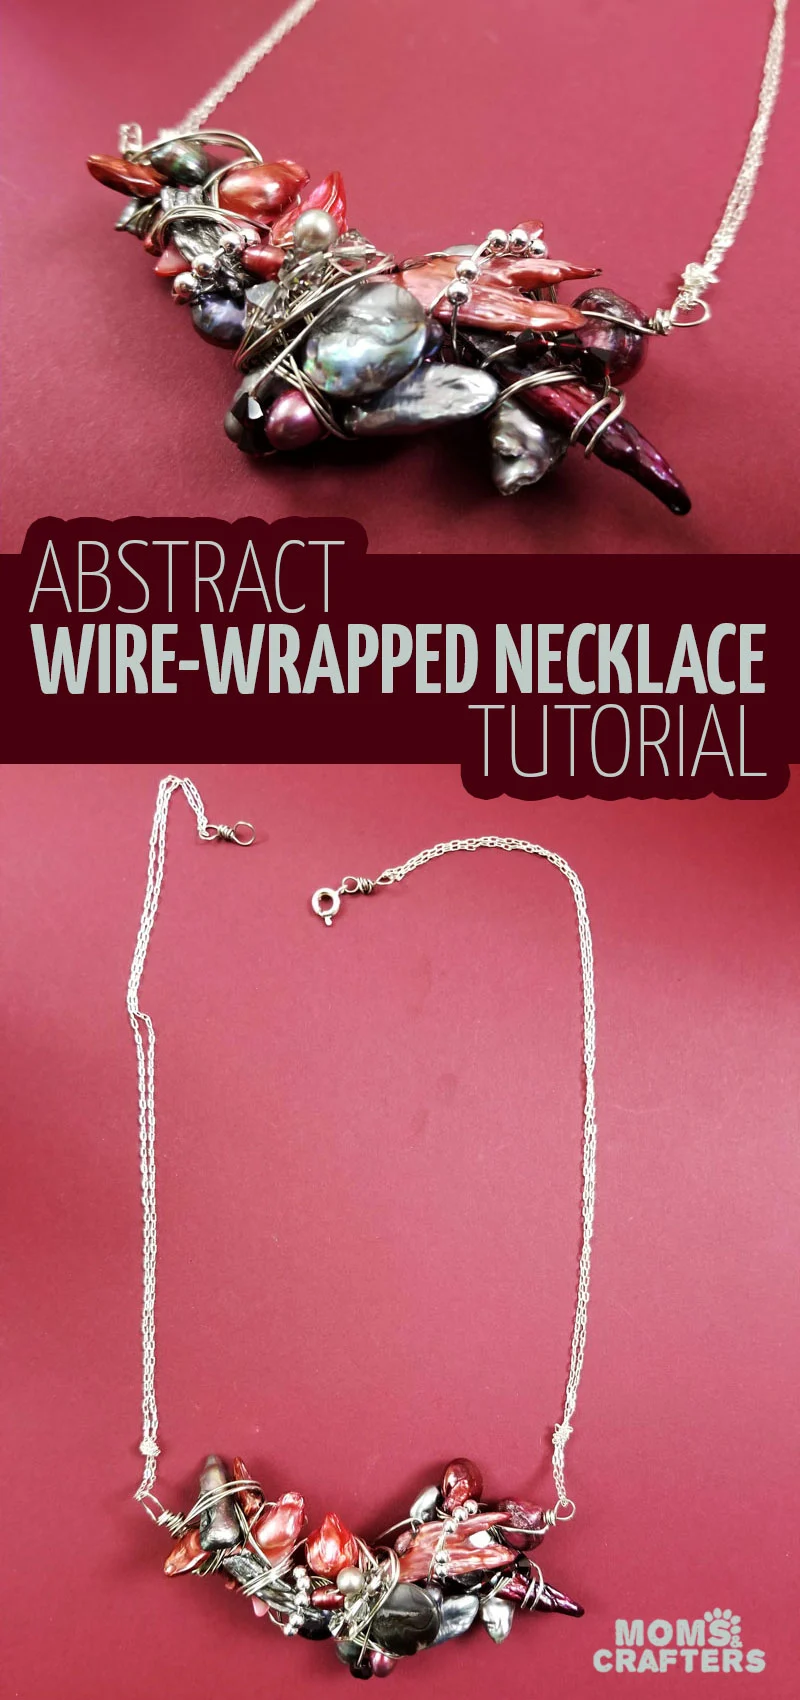 Click for a magnificent necklace wire wrap tutorial! This stunning abstract freshwater pearl stone and crystal DIY wire wrapping tutorial is a beautiful jewelry making idea and craft for the holidays or for bridesmaids too. #jewelrymaking #wirewrap #weddings